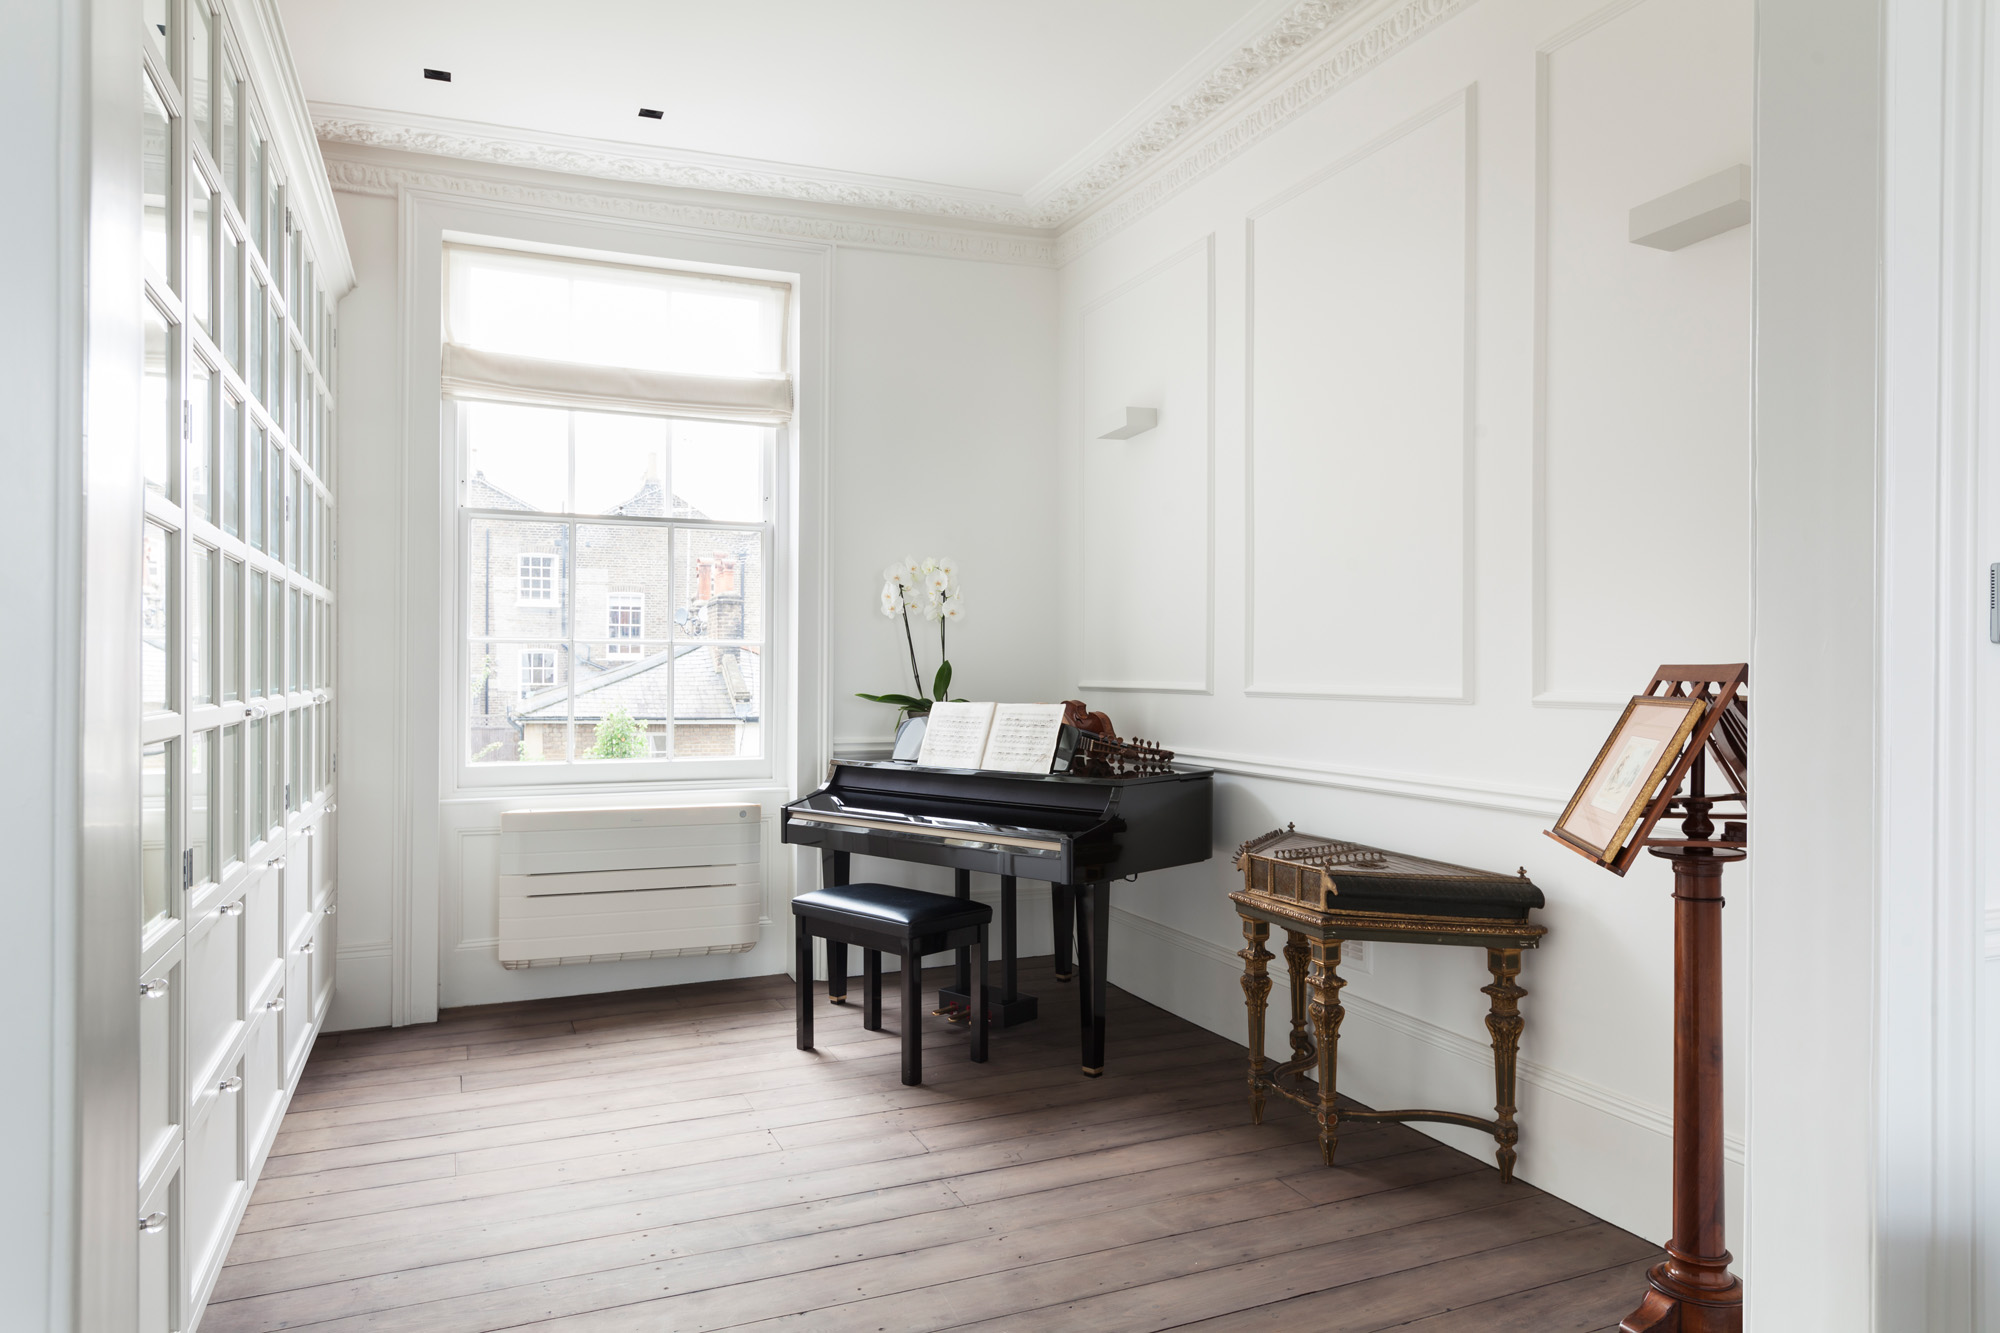 Minimalist interior design and piano Hereford Road Notting Hill W2